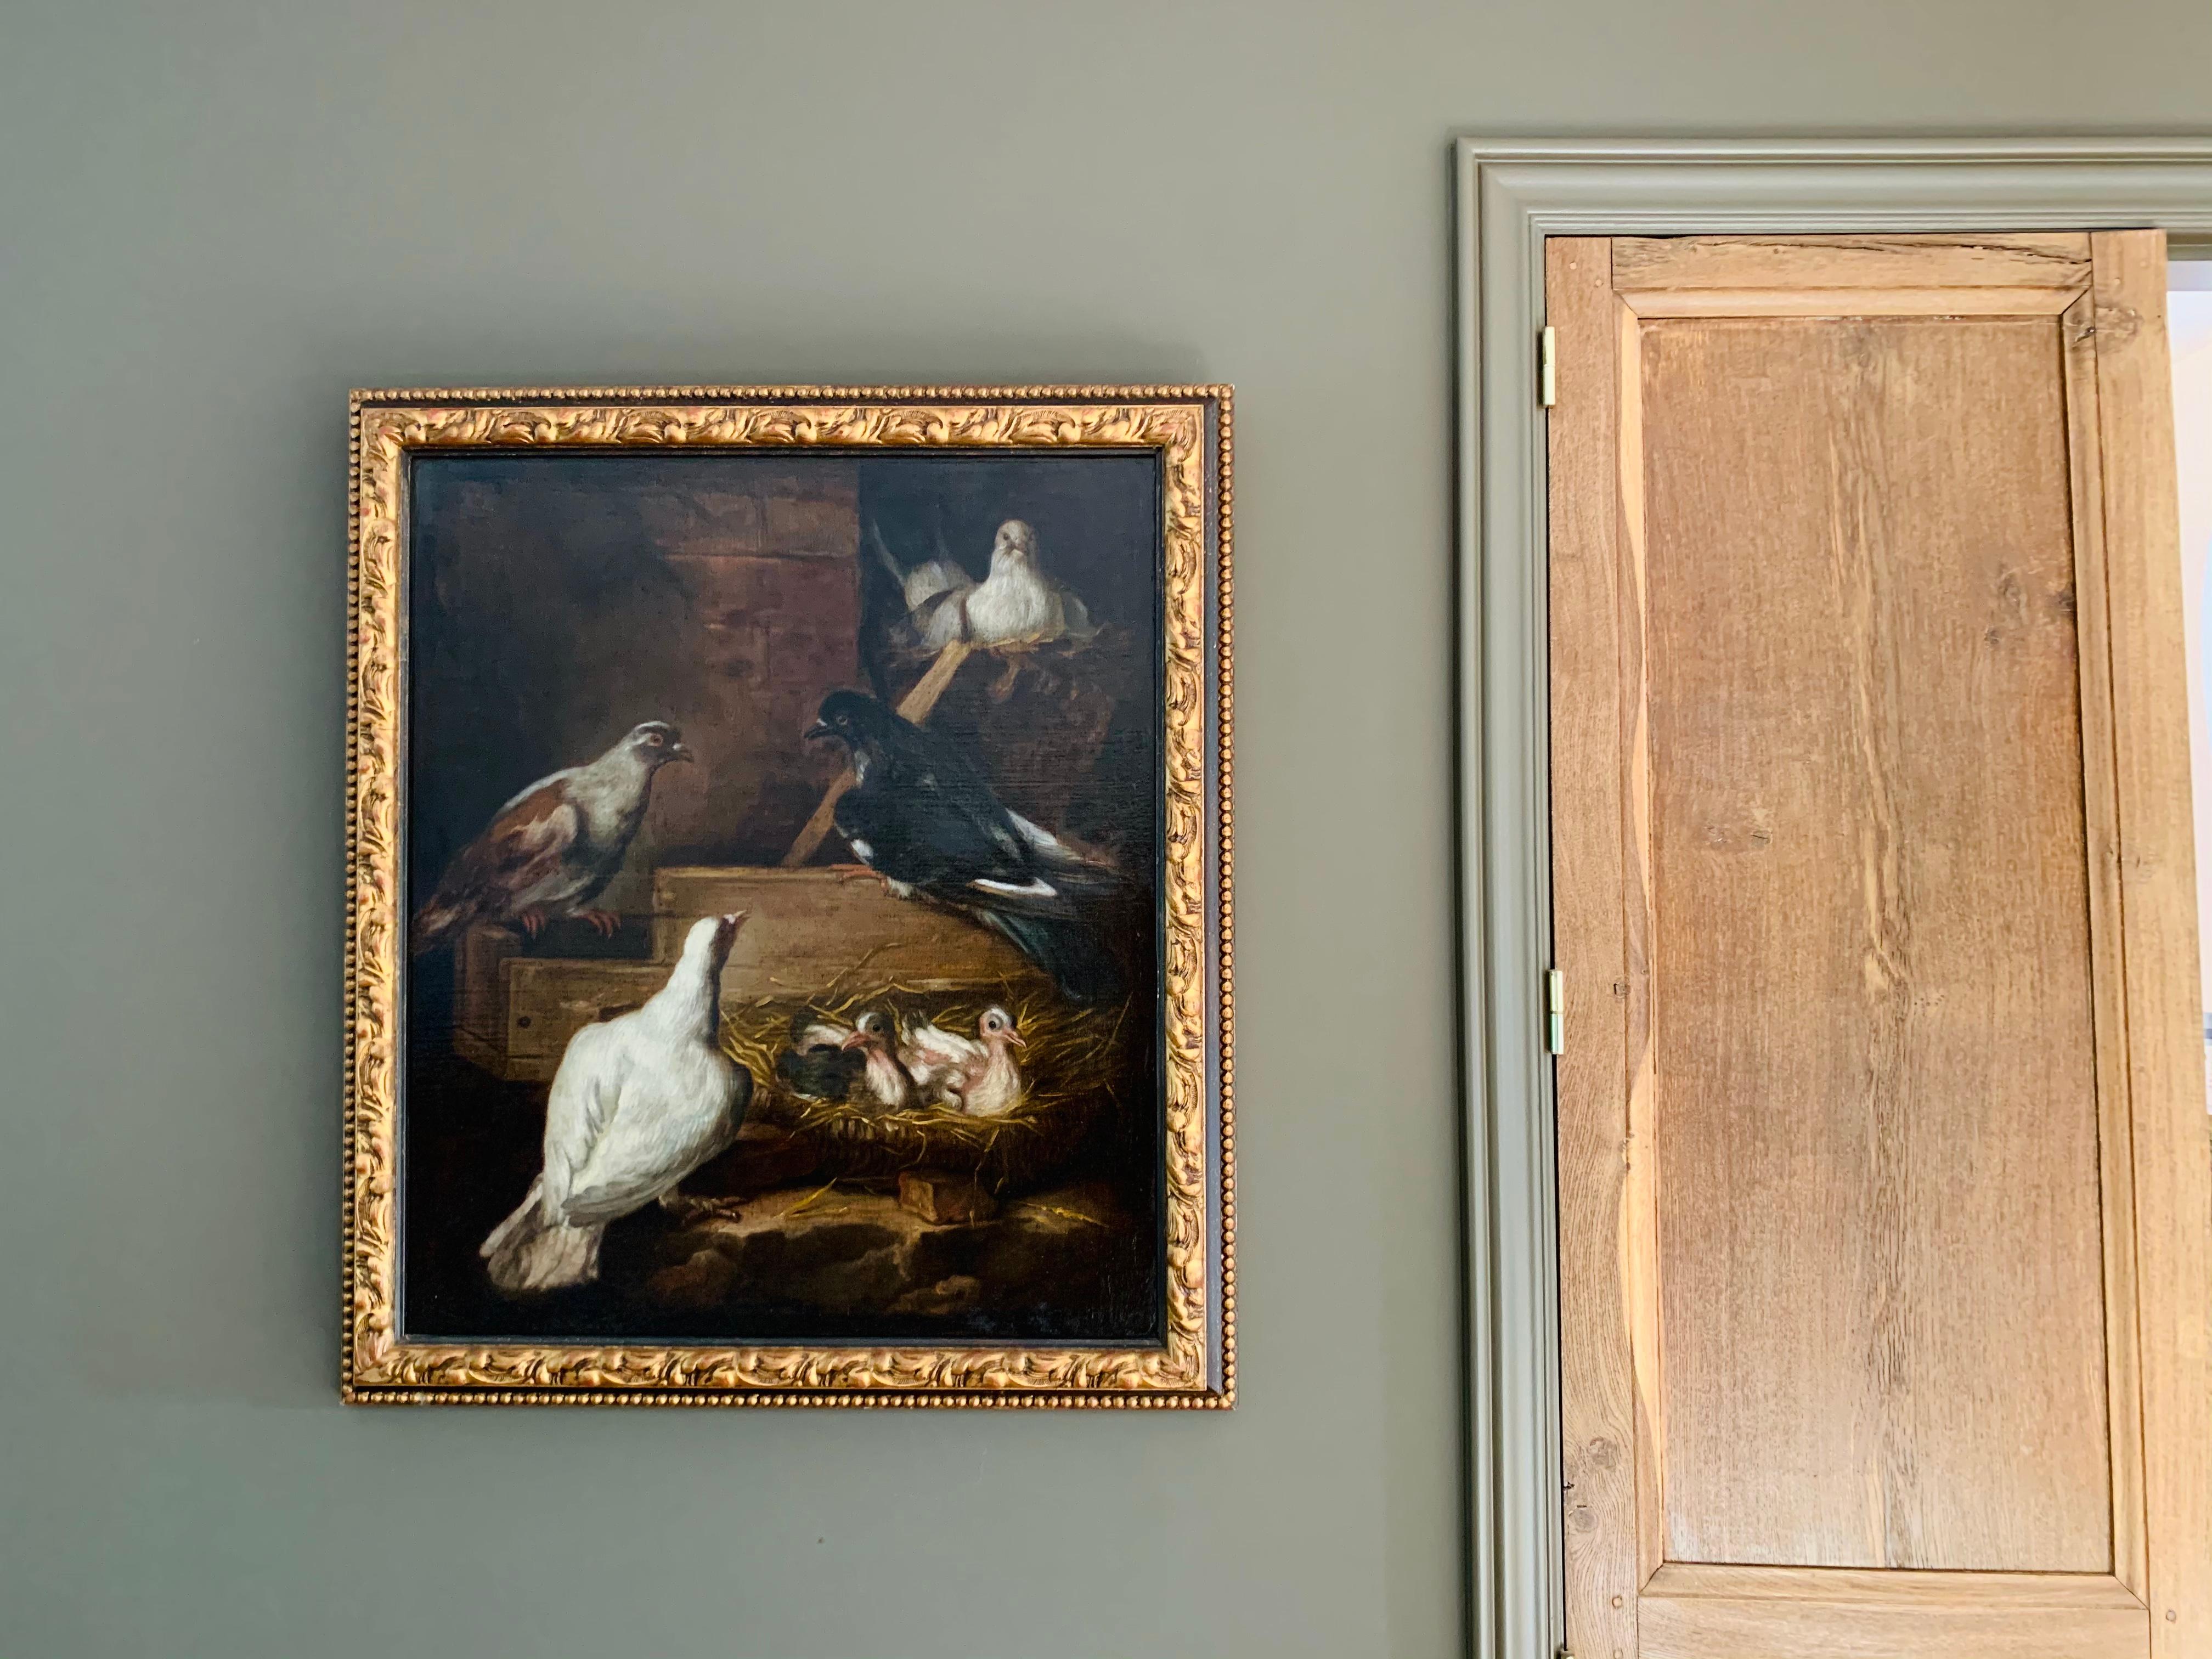 We offer a special 20% discount on this item during the Holiday Sale only until November 30.

This 17th century Italian Baroque painting is both a symbol of a happy and warm home (nest) as well as a wonderful and ornithilogically accurate depiction